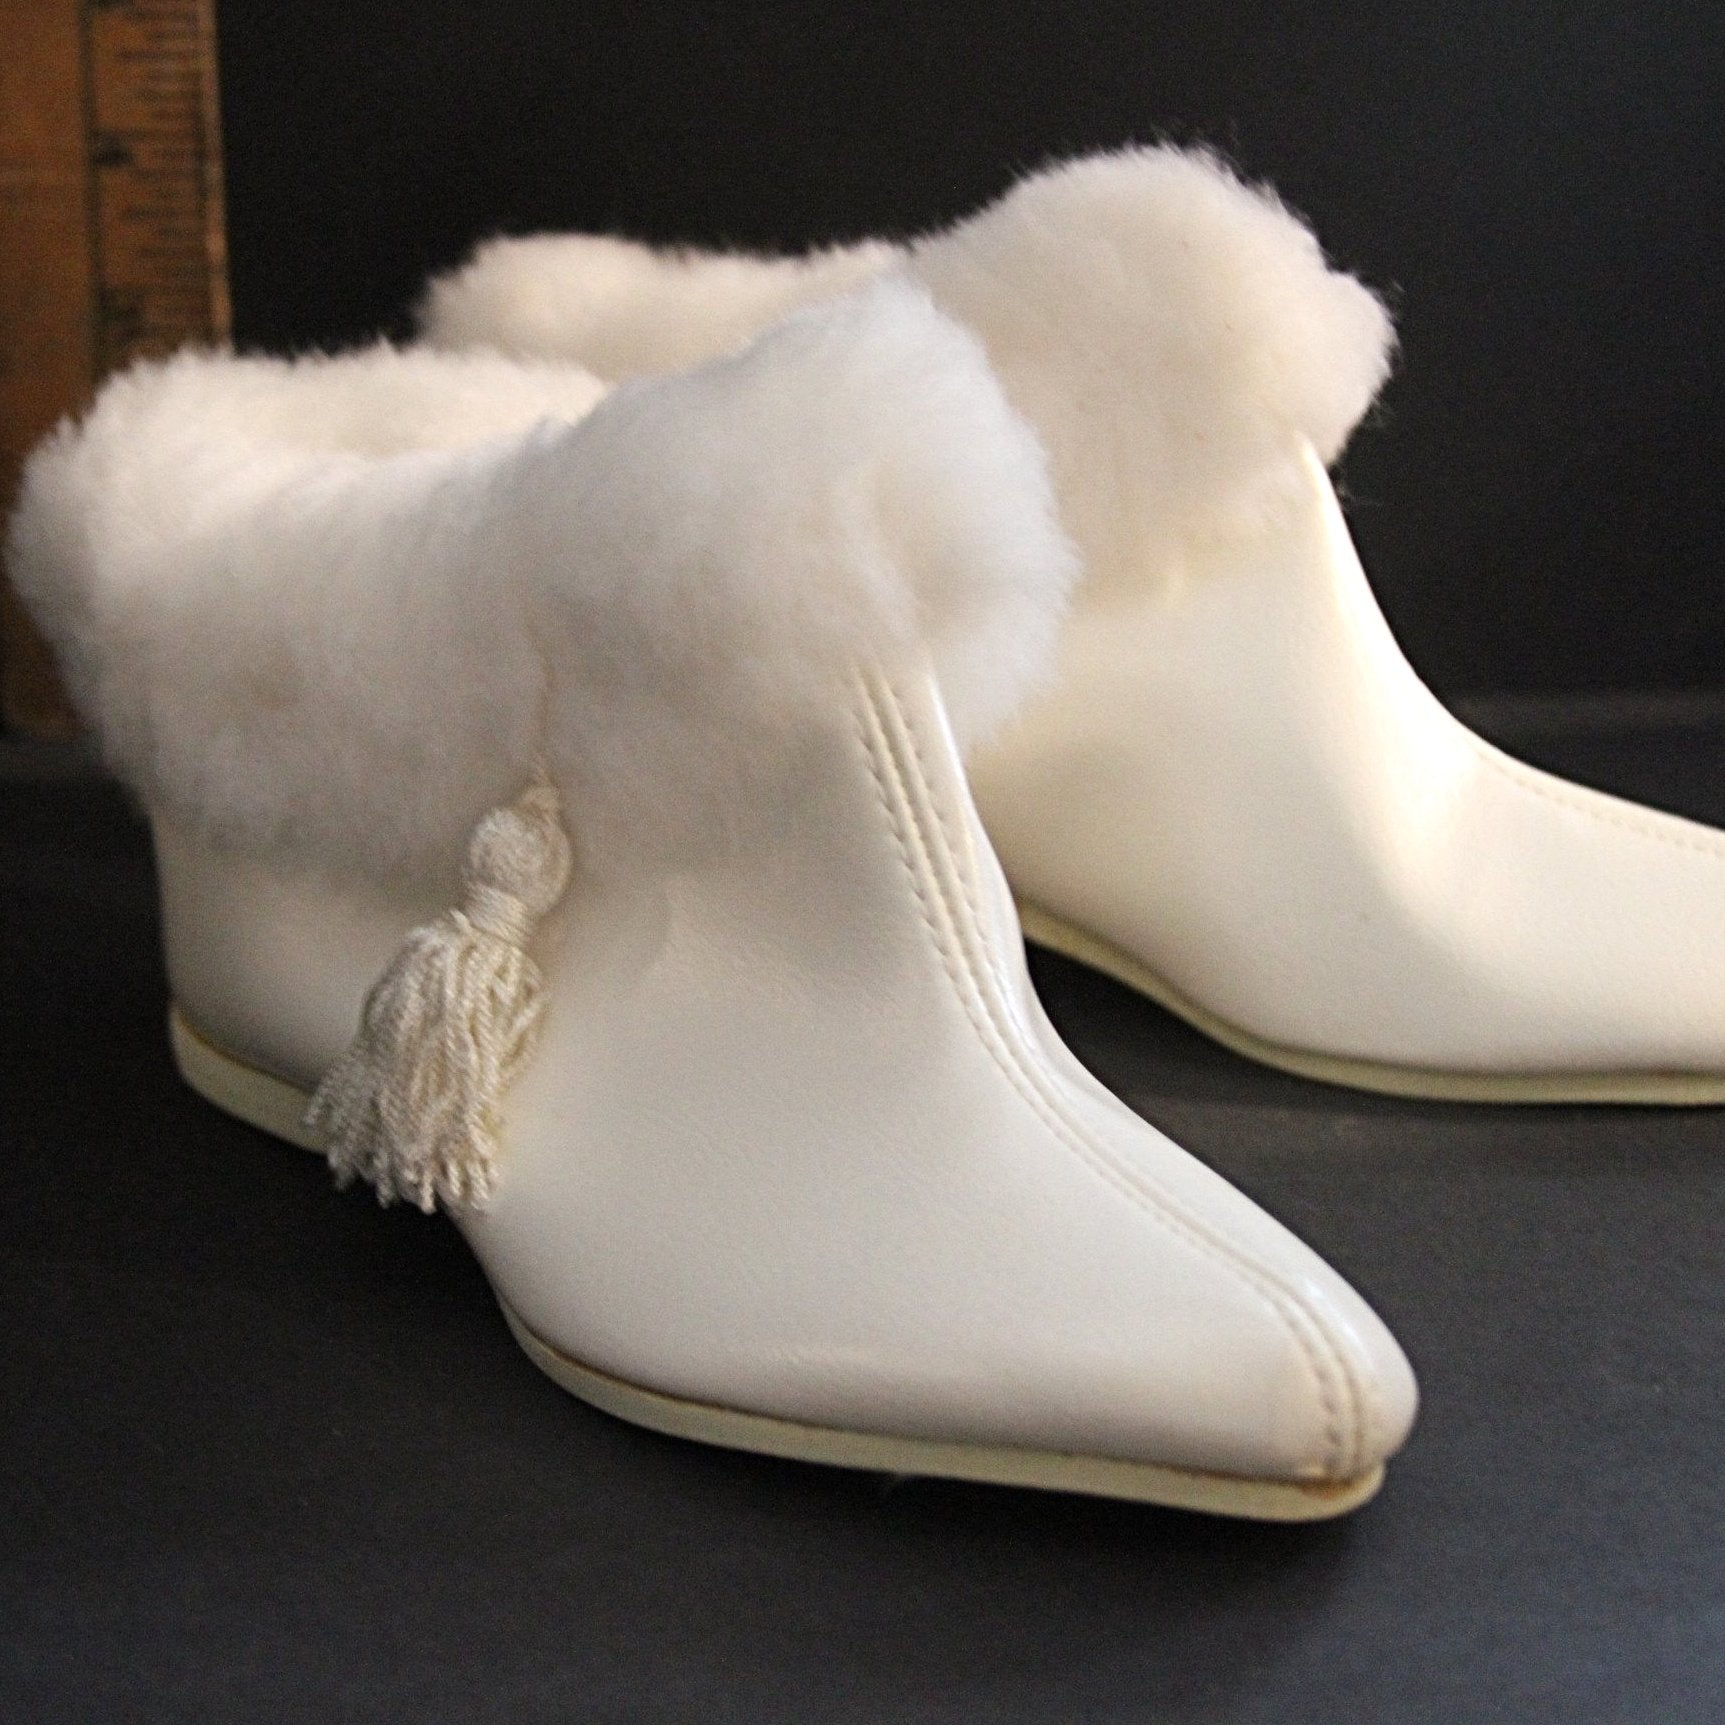 KLICKETTES WHITE GO-GO BOOTS Trimmed in White Fur New Old Stock with Box